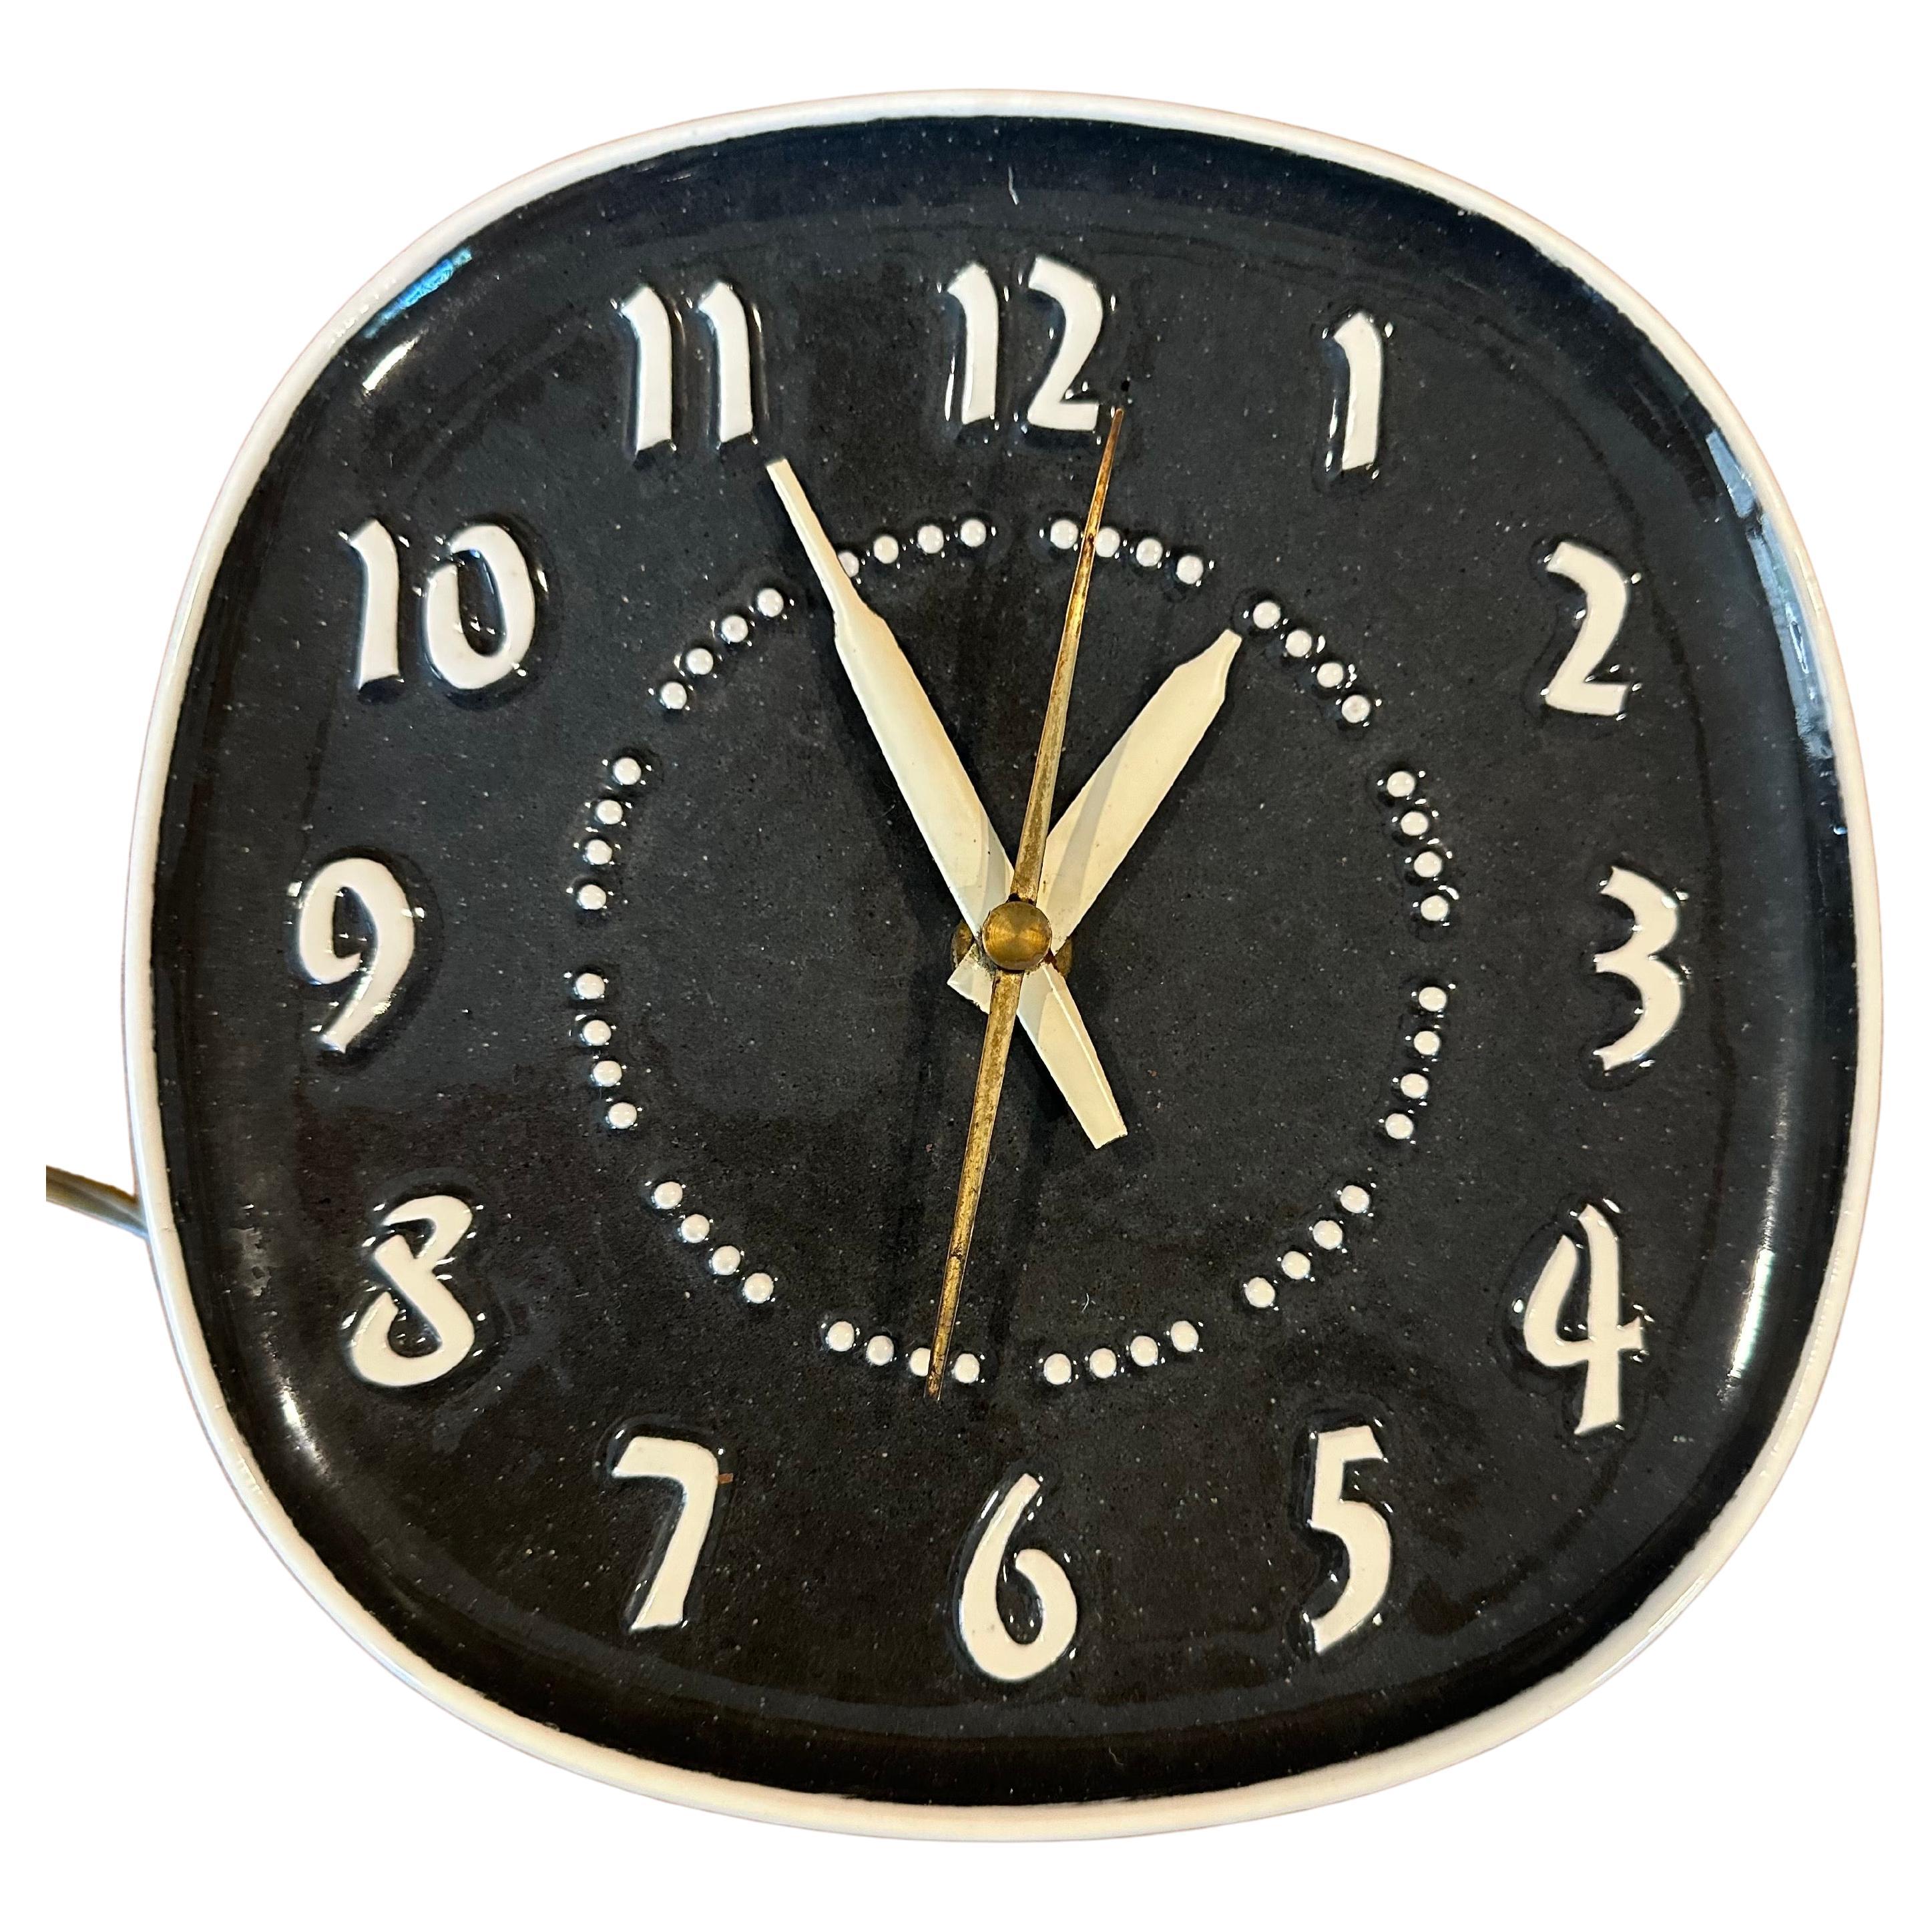 Stylish and functional American modern ceramic electric wall clock by Russel Wright for General Electric, circa 1940s. The piece is in very good vintage with no chips or cracks and measures 8